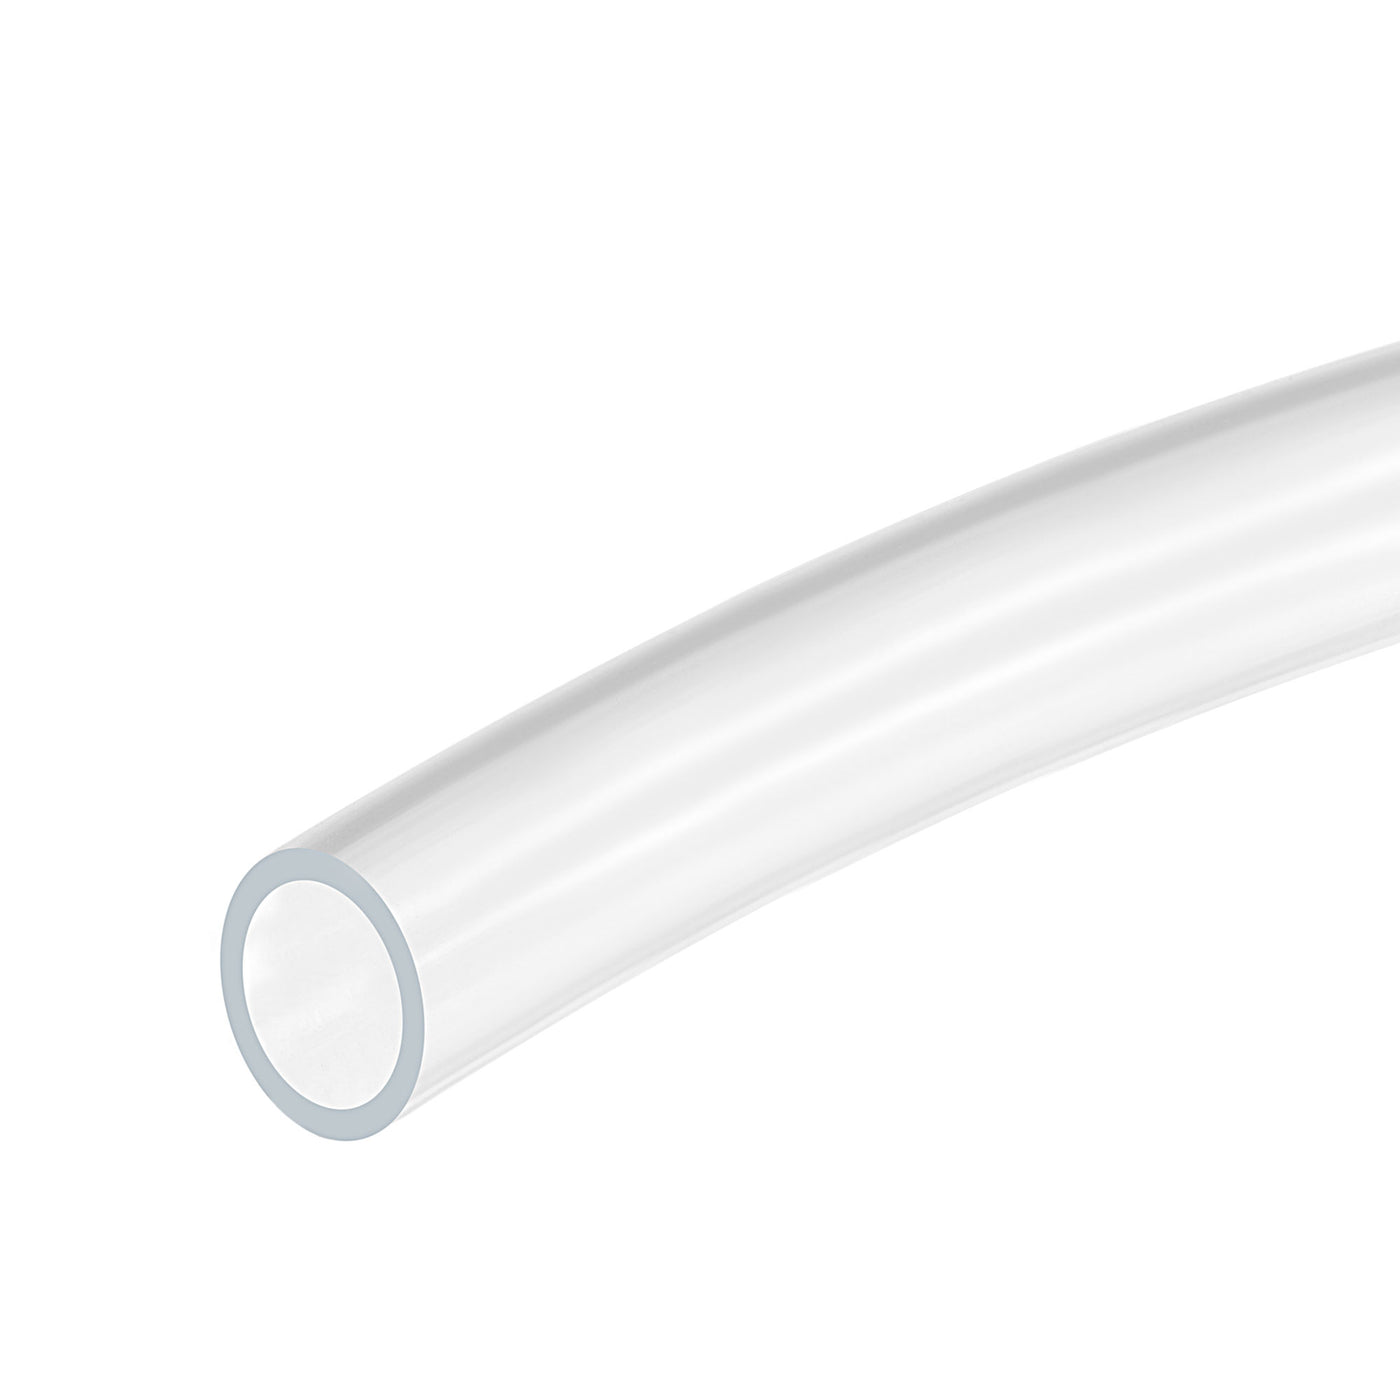 uxcell Uxcell PVC Clear Vinyl Tubing, 14mm(9/16-inch) ID 18mm OD 3.3ft Plastic Pipe Air Water Hose